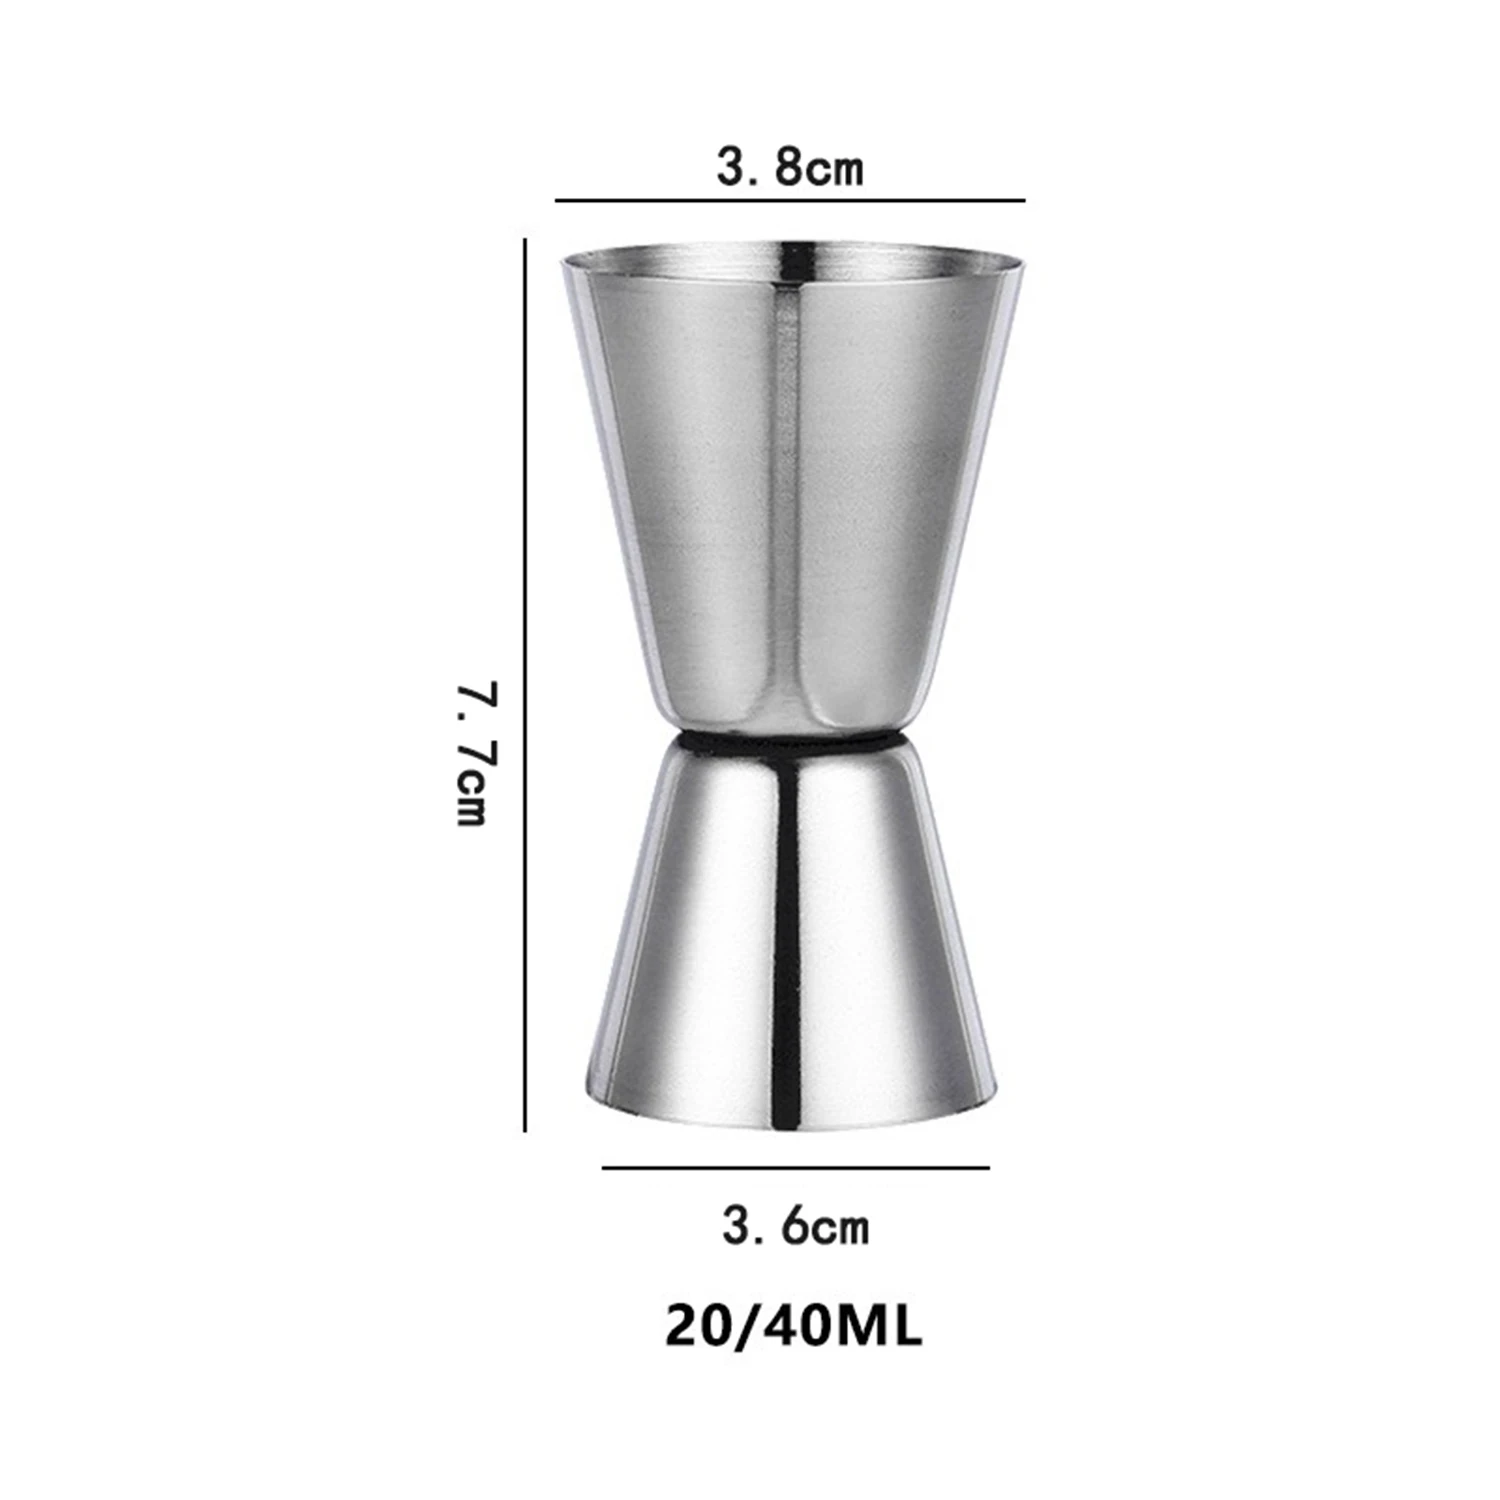 hot sale jigger camol stainless steel